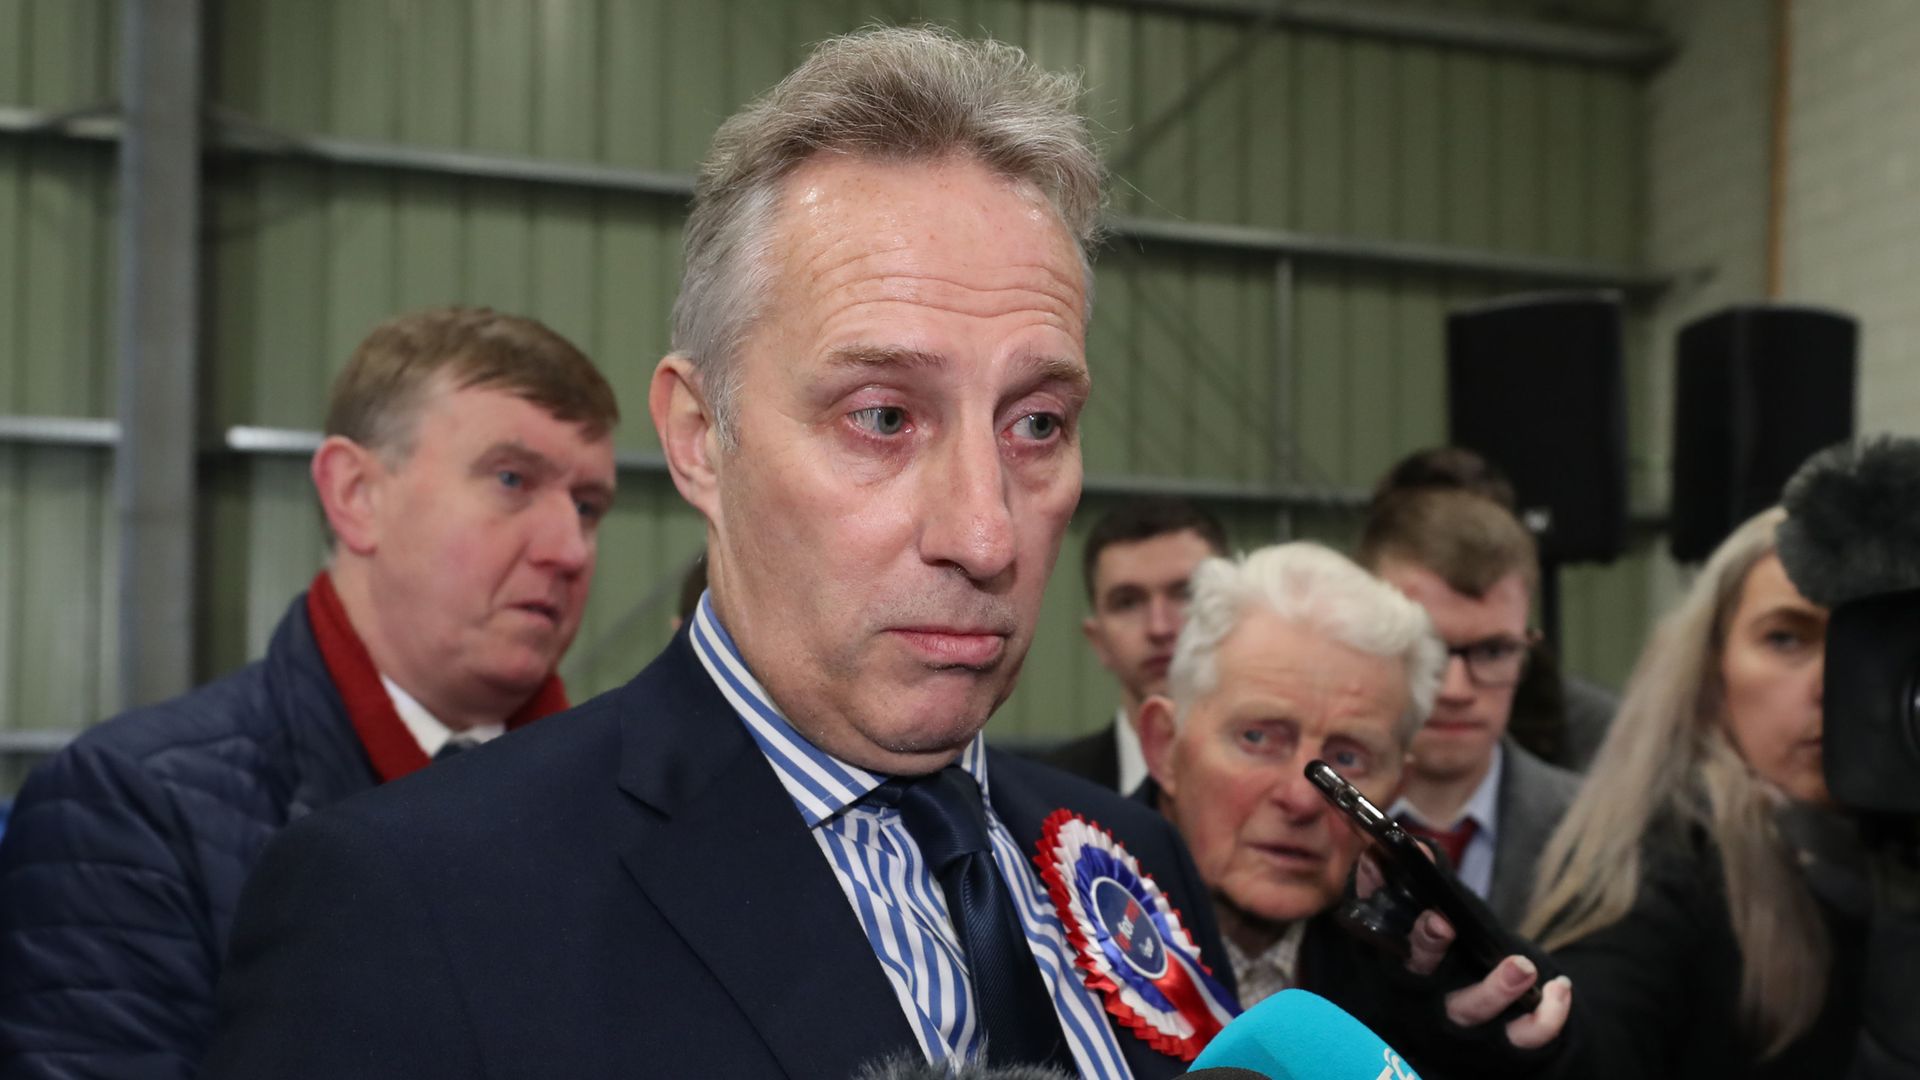 Ian Paisley Jnr speaking to the media - Credit: PA